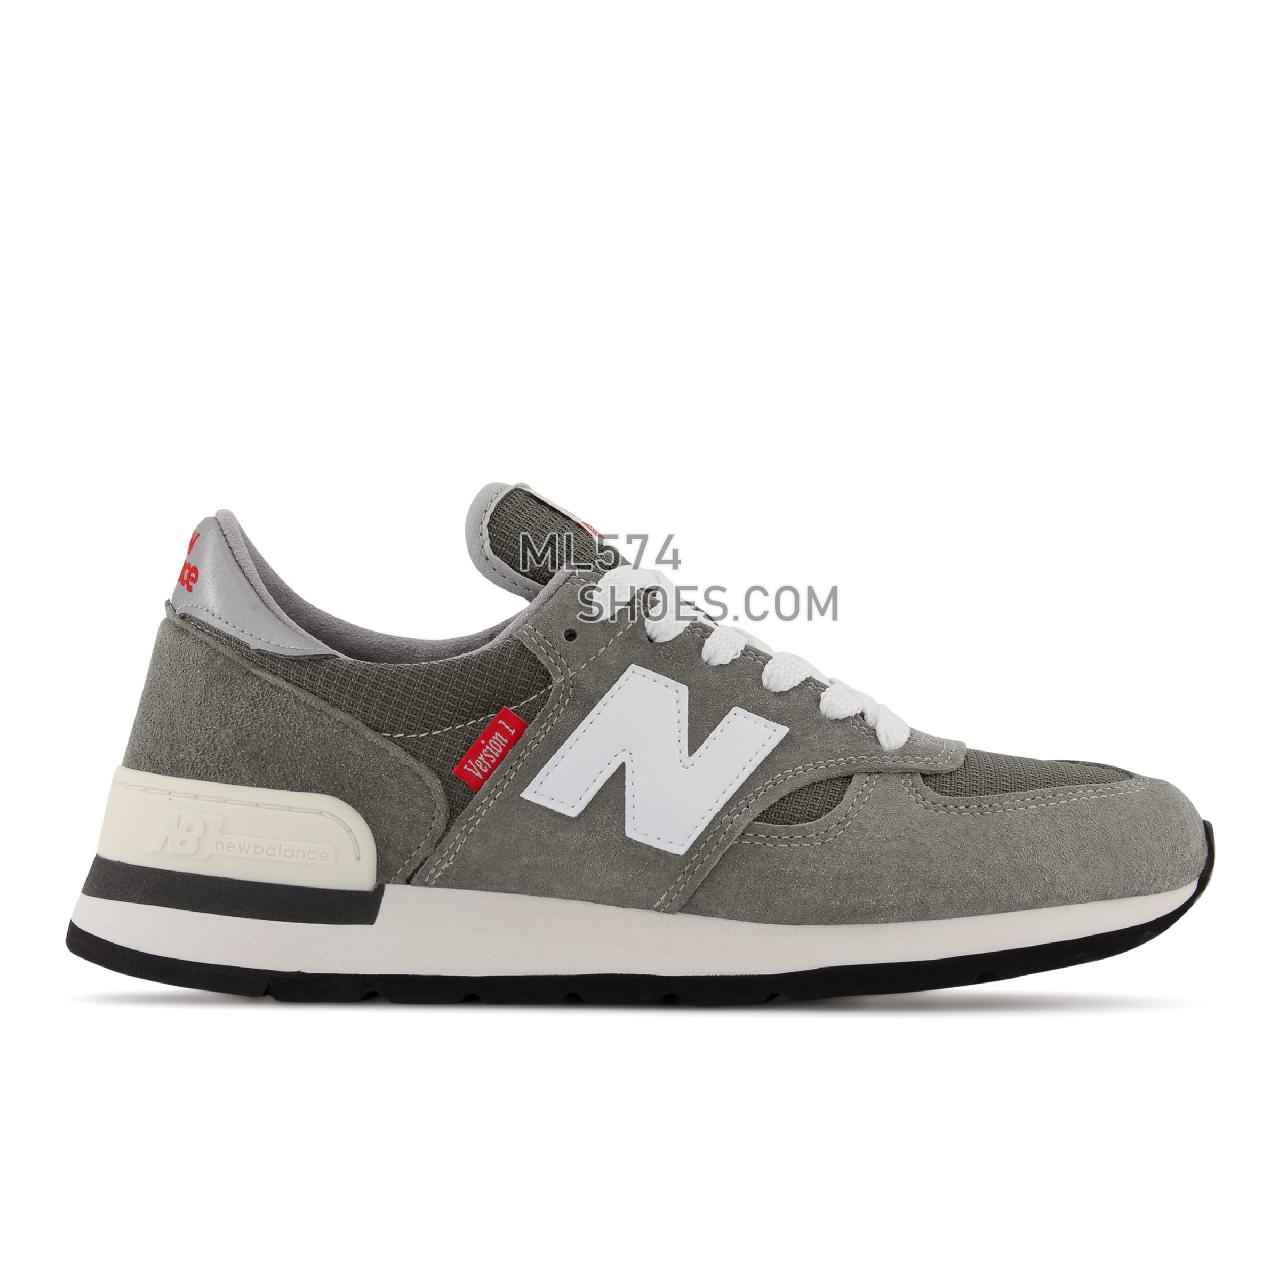 New Balance Made in USA 990 - Men's Made in USA And UK Sneakers - Grey with Red - M990VS1